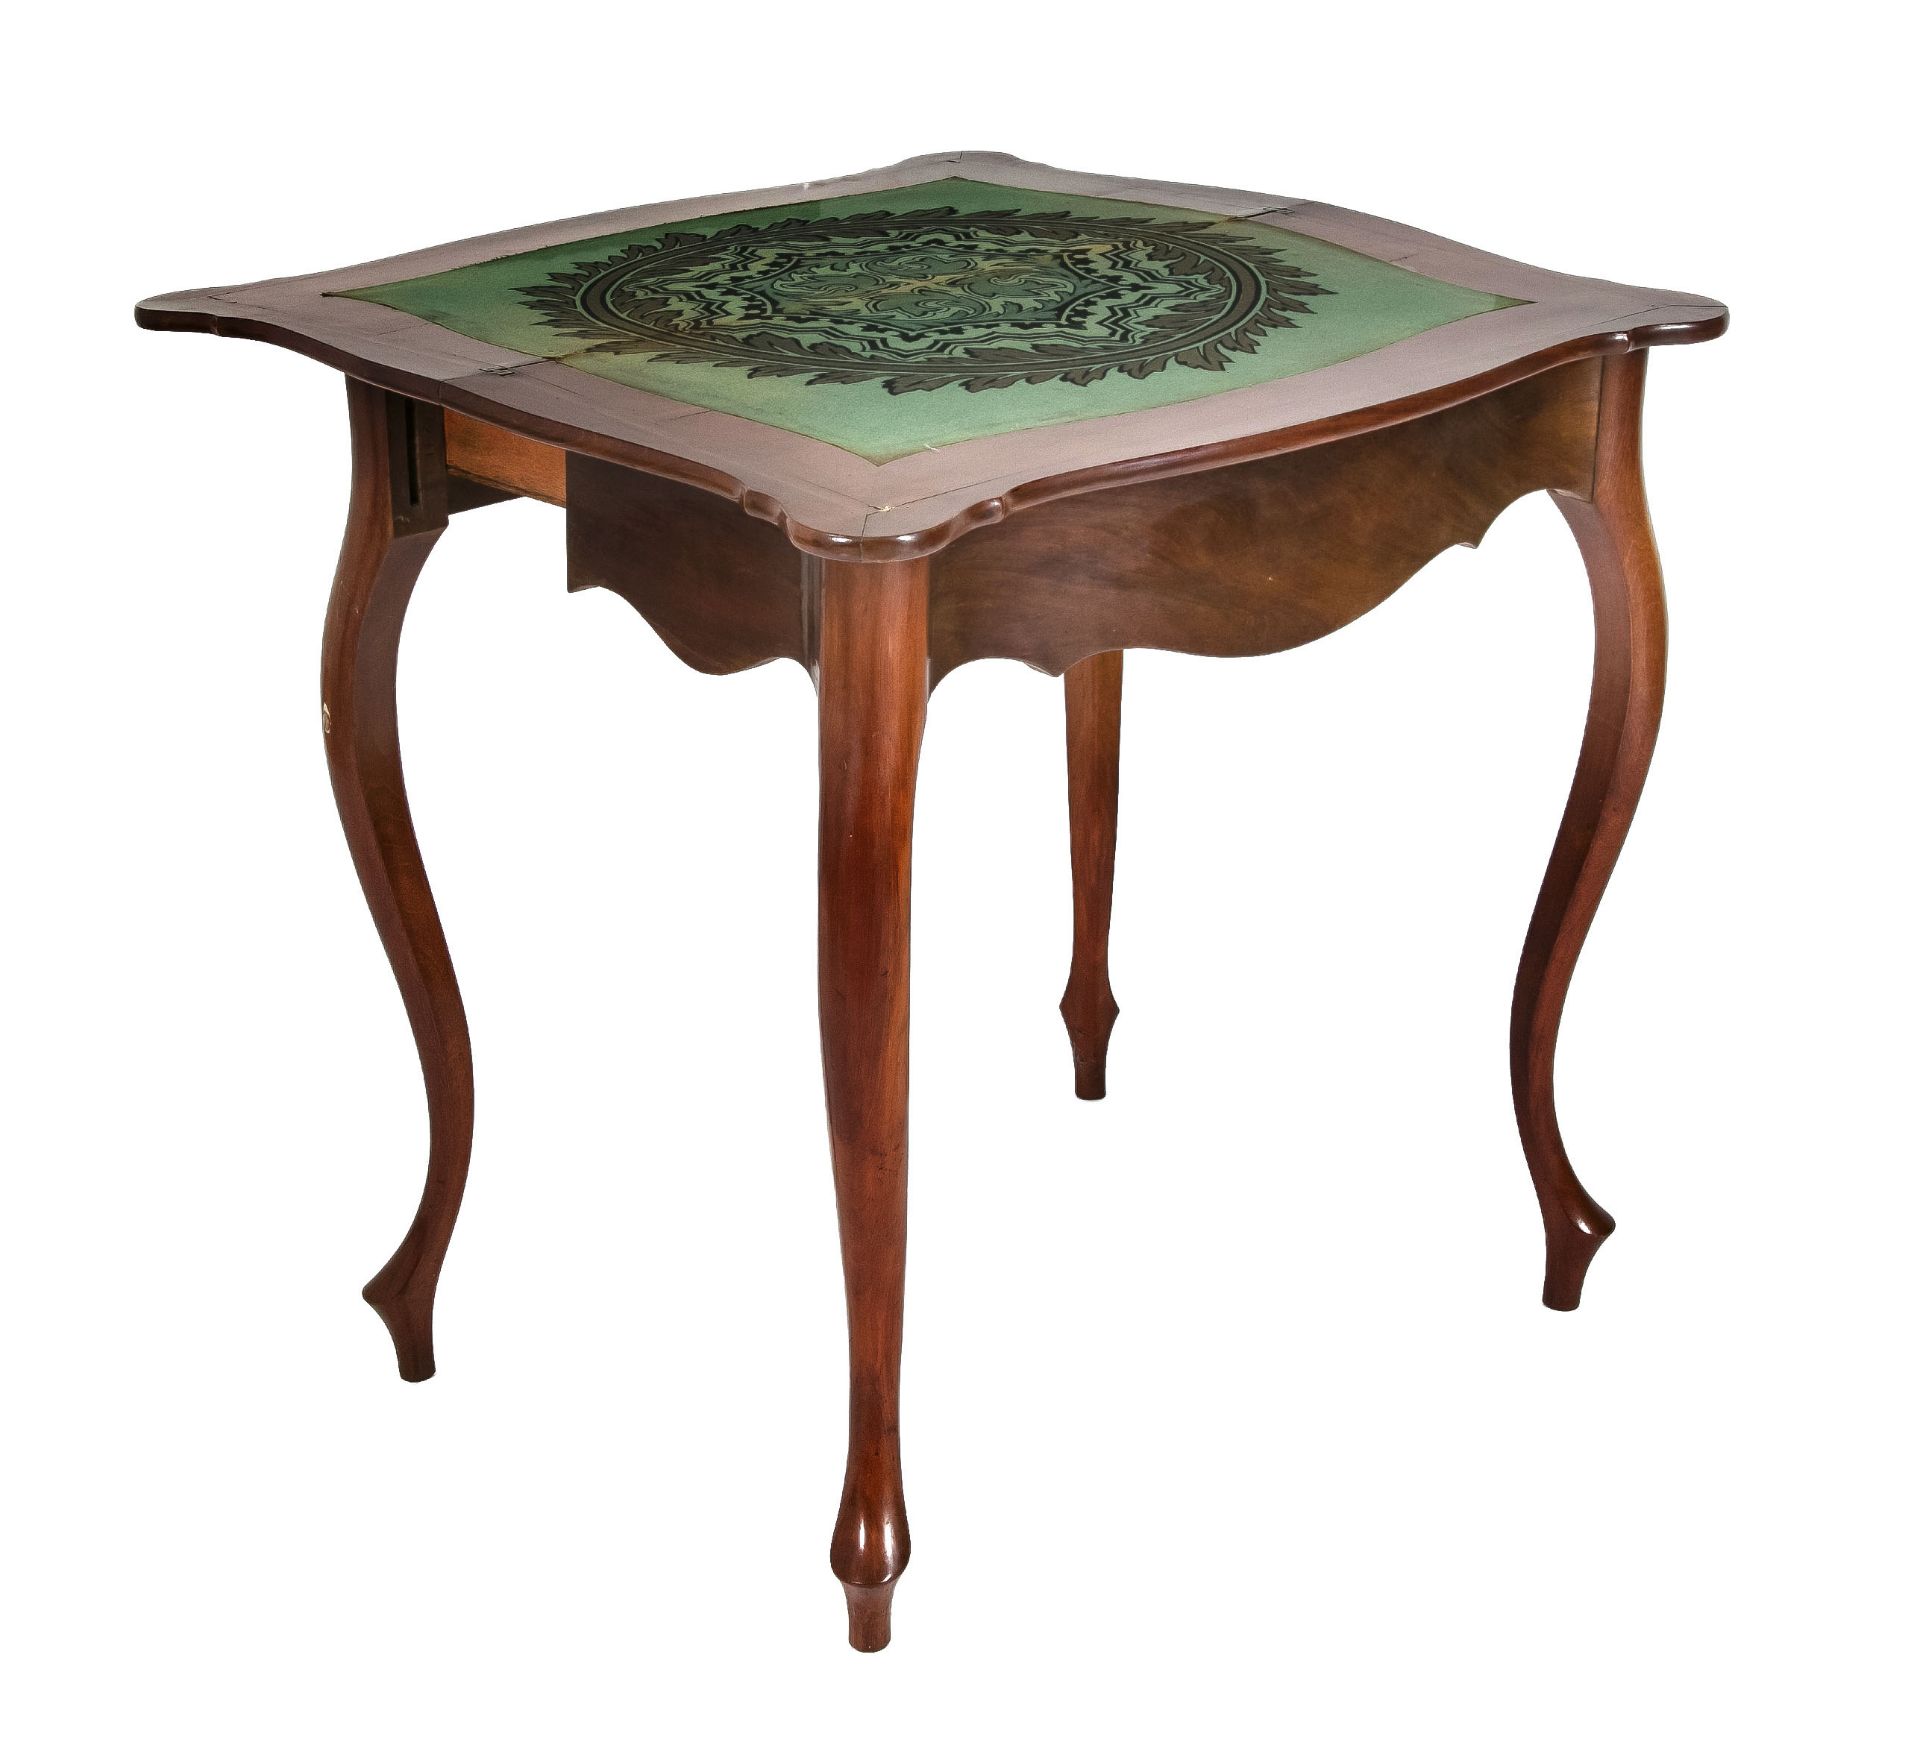 Console/play table circa 1870, mahogany, 79 x 80 x 46 cm.- The furniture cannot be viewed in our